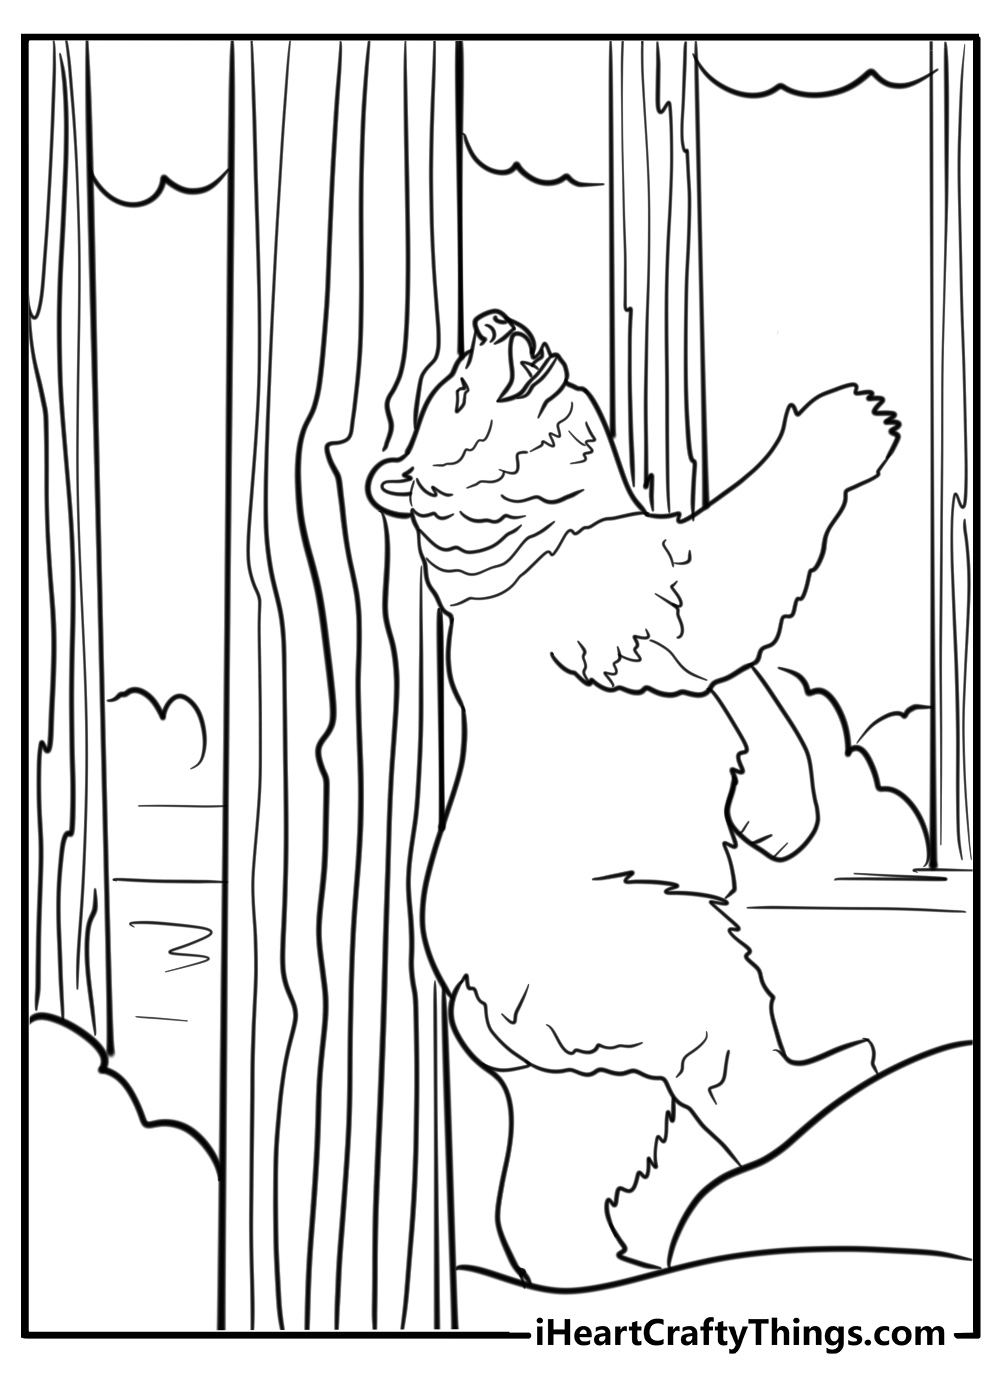 Adult bear coloring page rubbing back on tree